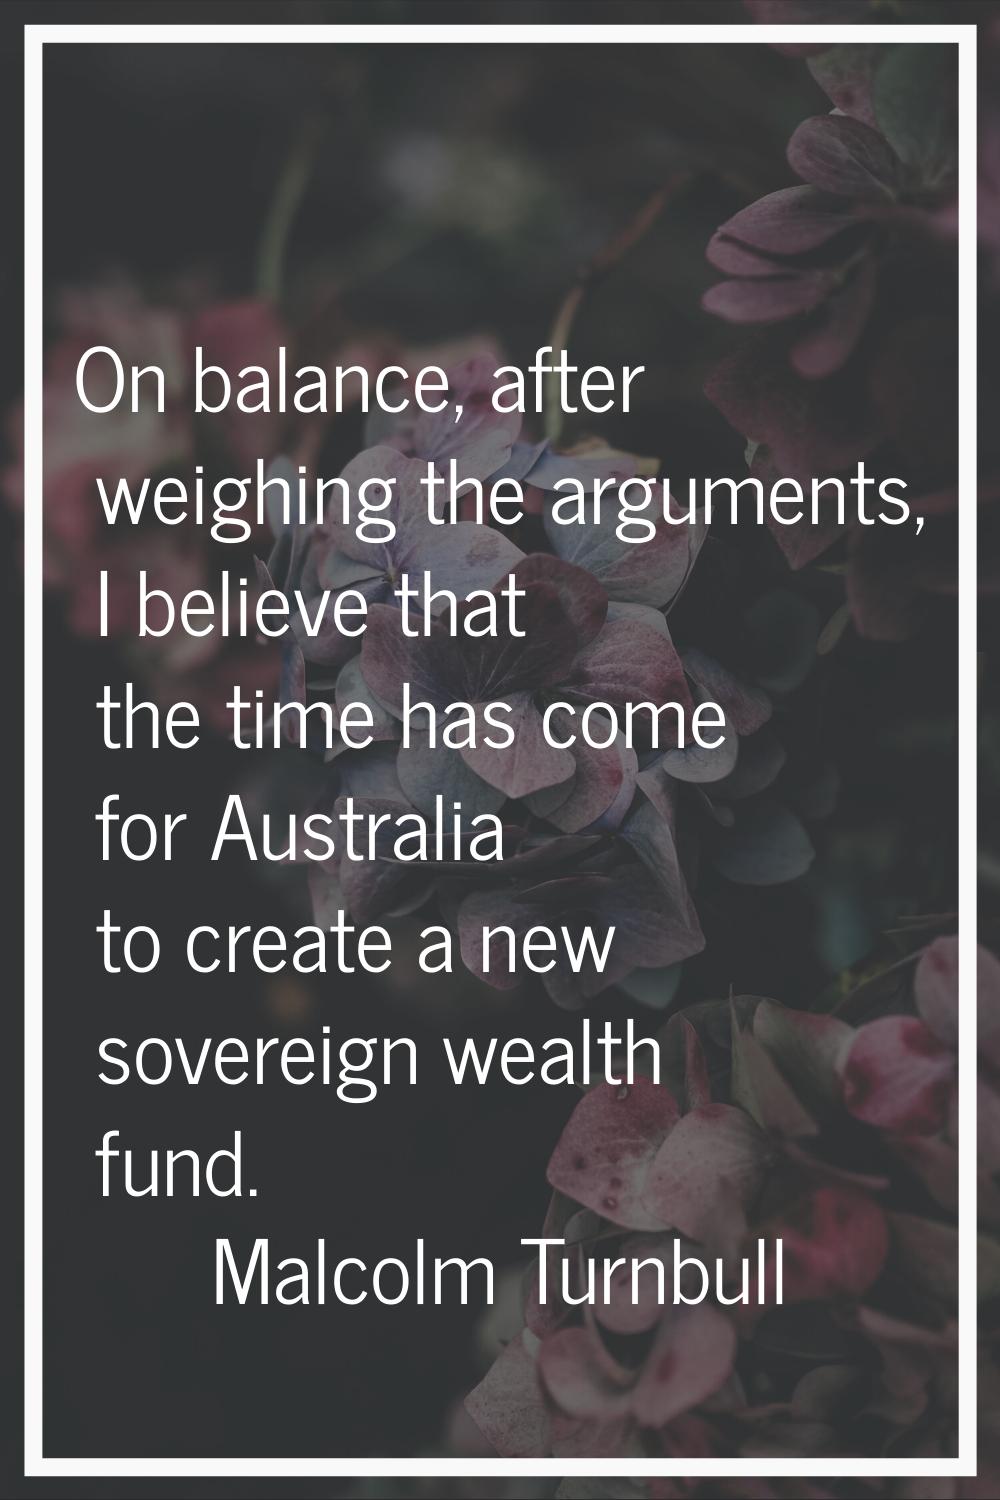 On balance, after weighing the arguments, I believe that the time has come for Australia to create 